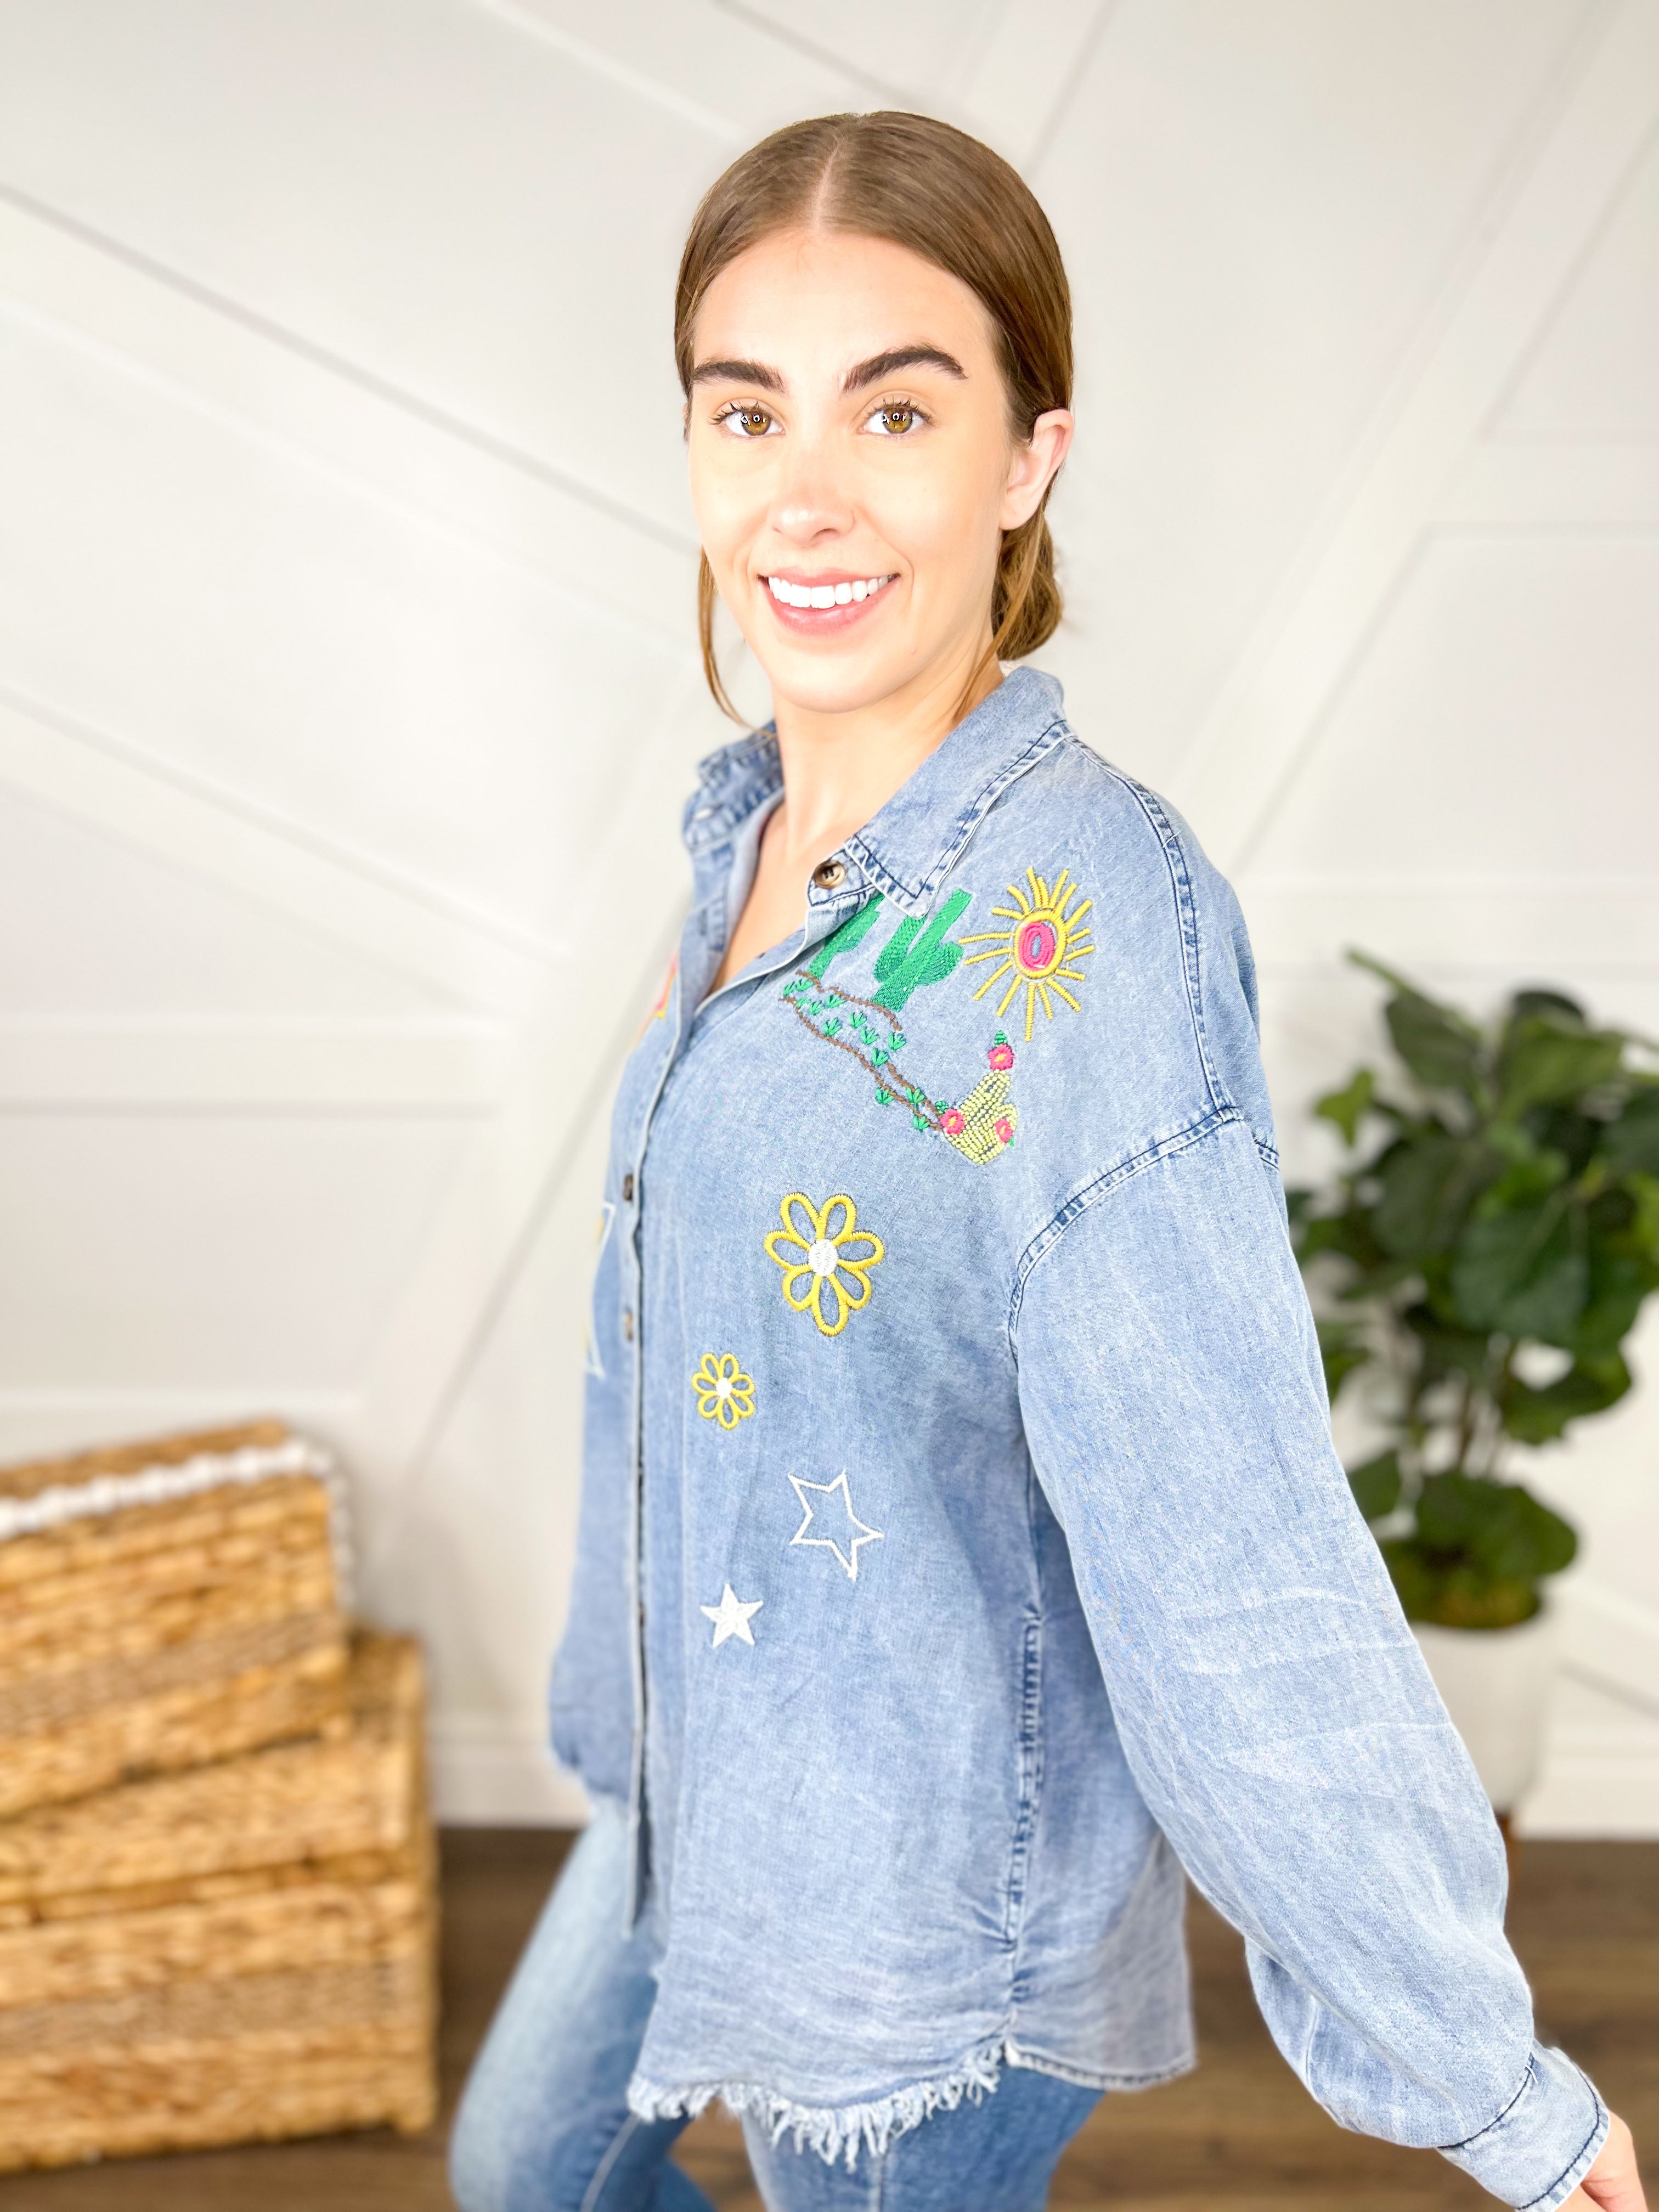 RESTOCK : Once Upon a Time Button Down Top-120 Long Sleeve Tops-BlueVelvet-Heathered Boho Boutique, Women's Fashion and Accessories in Palmetto, FL